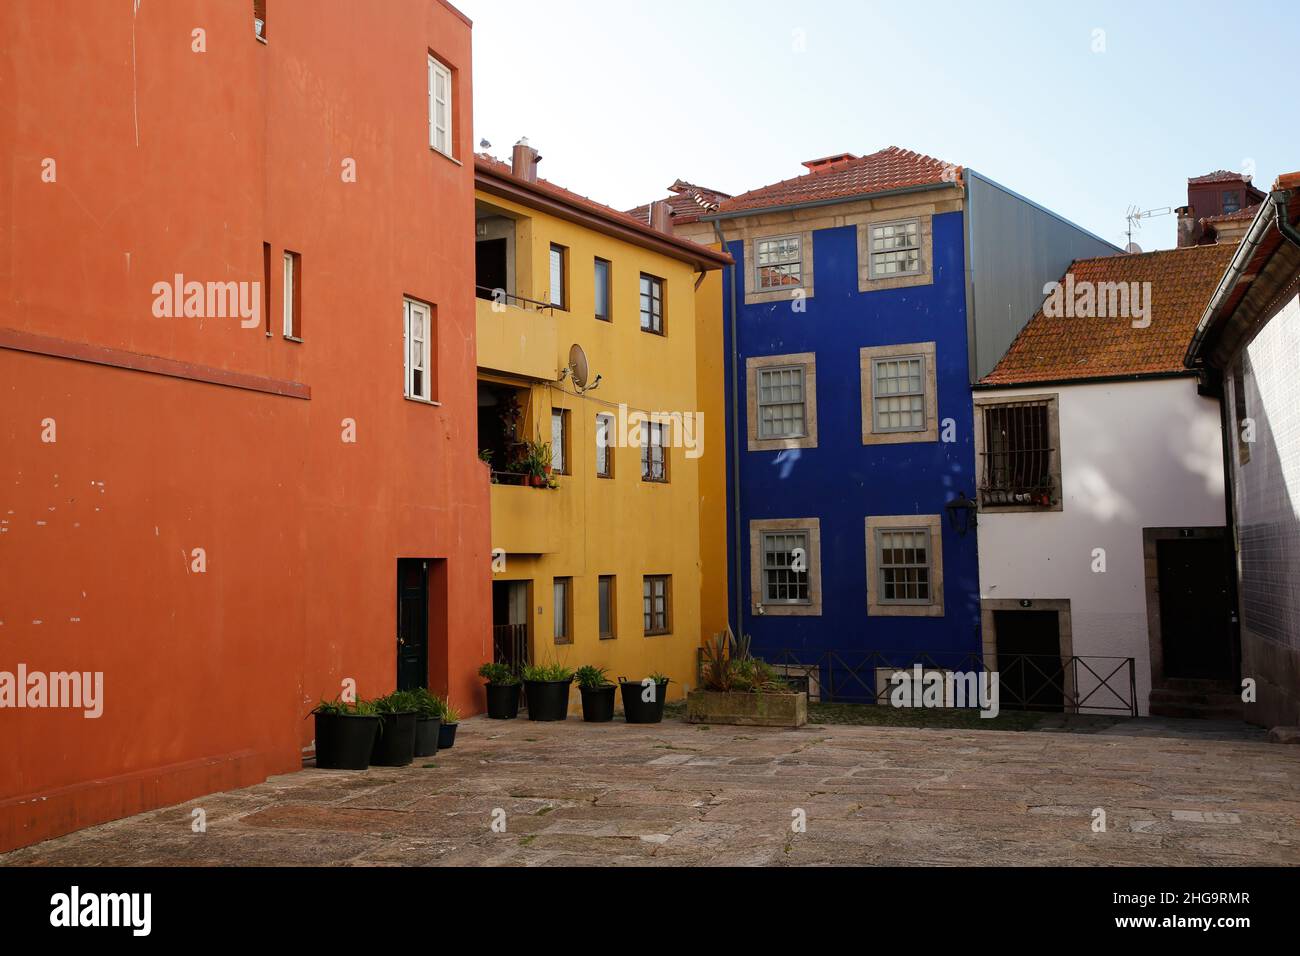 The colorful homes of Porto, Portugal grouped together in a russet, yellow, blue, and white palette. Stock Photo